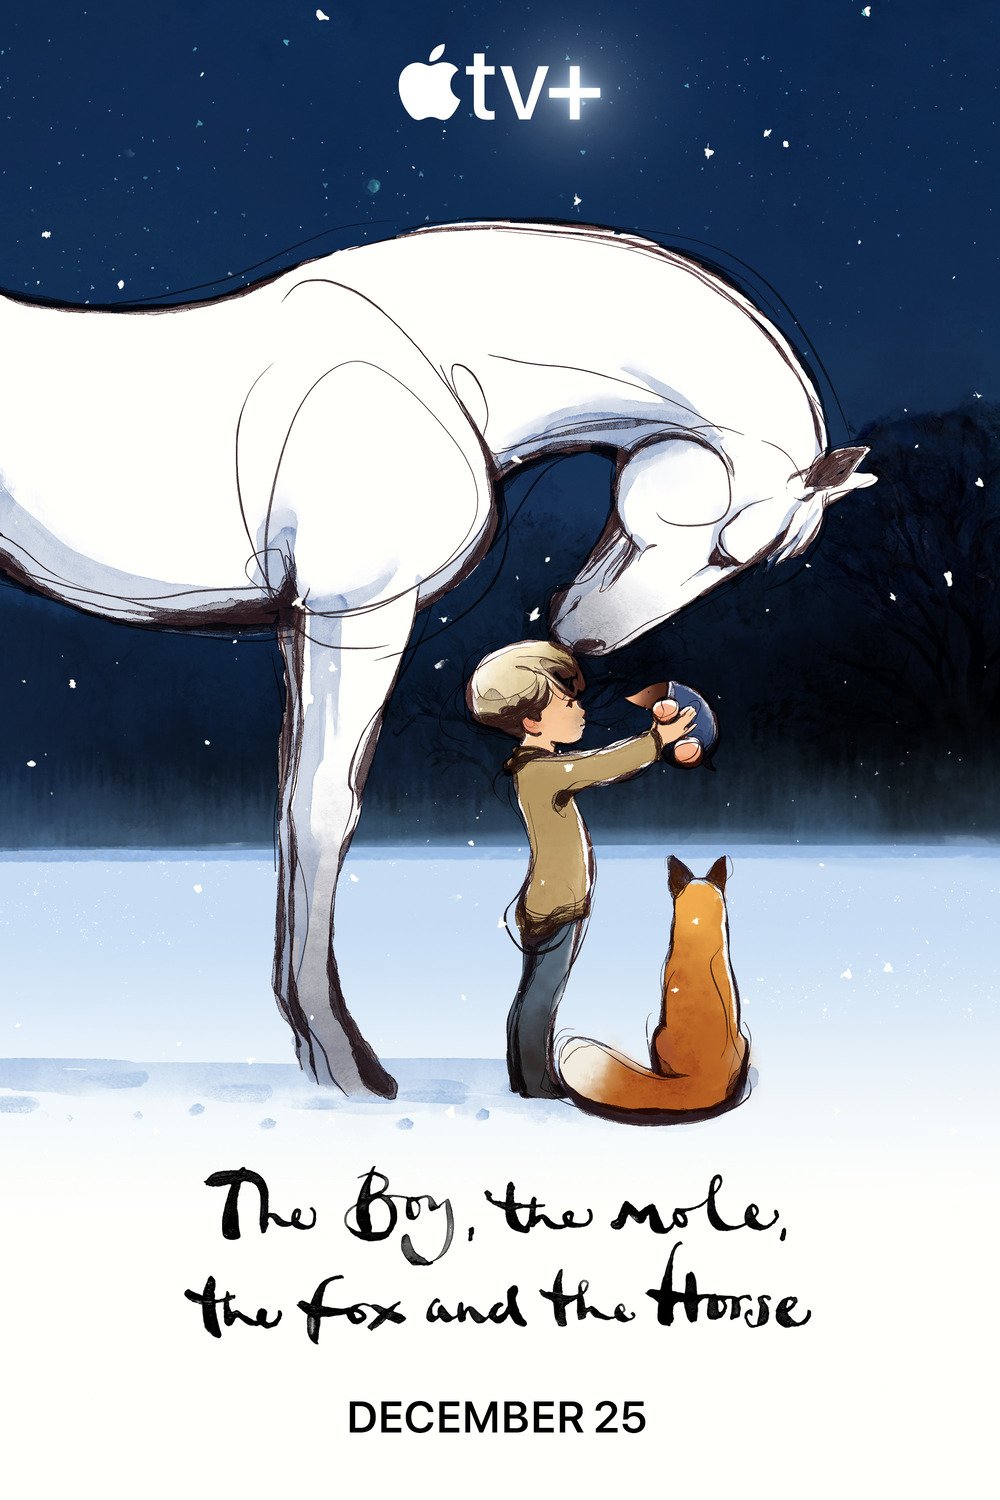 L'affiche du film The Boy, the Mole, the Fox and the Horse